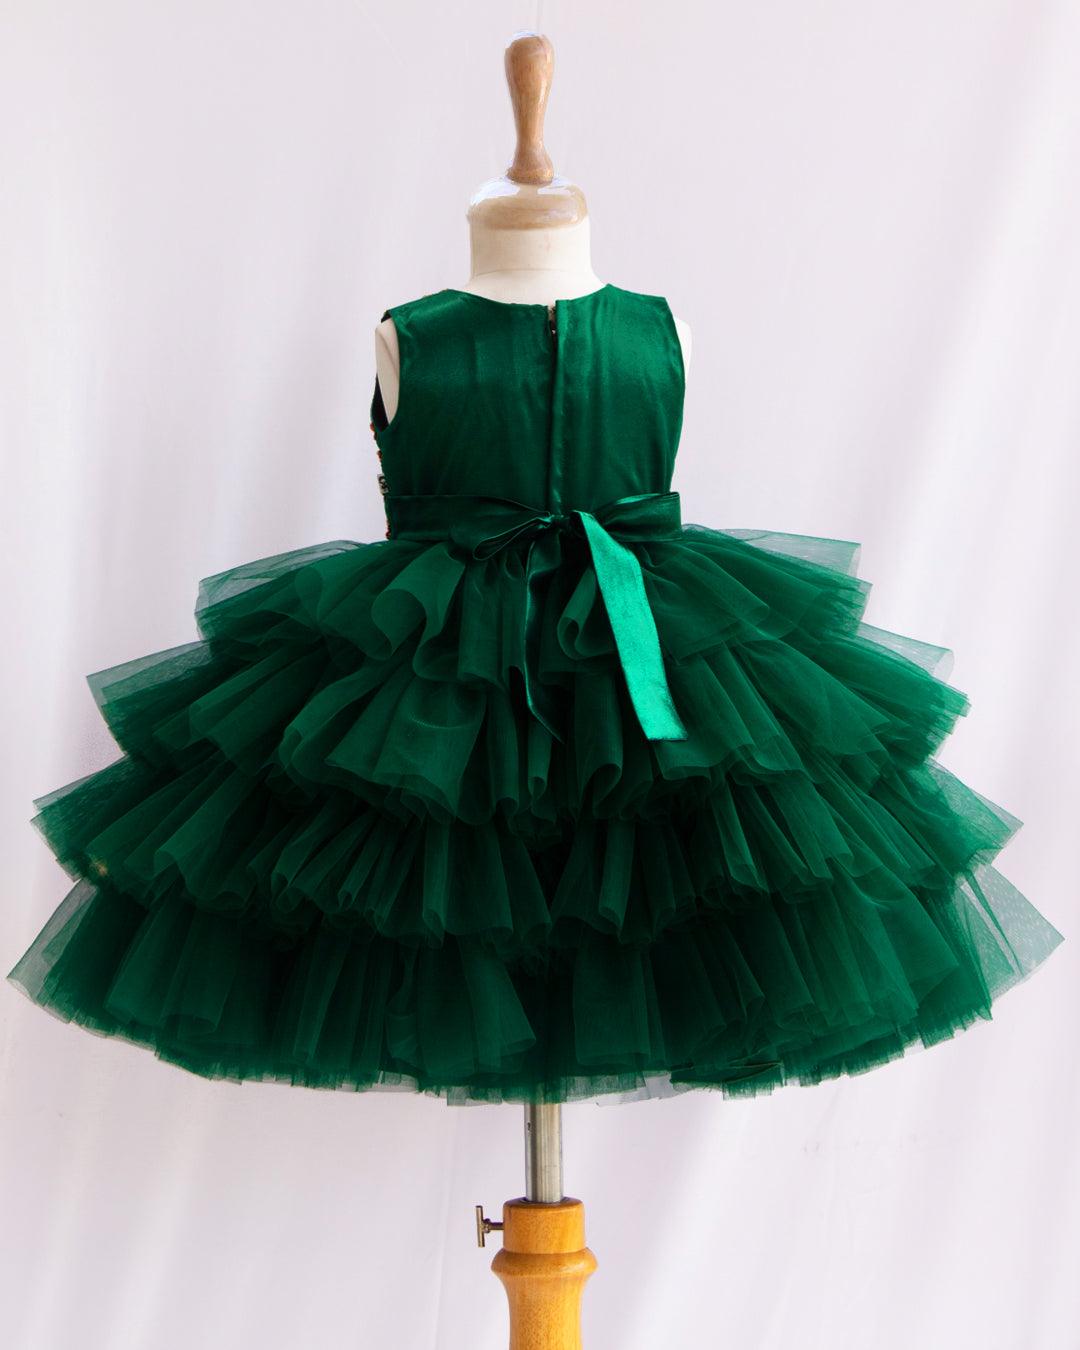 Bottle Green Hand Embroidery Layer Frock
Material: Bottle Green shade mono nylon soft net fabric layered with premium ultra satin is used for shining. Yoke portion is fully hand worked with reddish meroon 